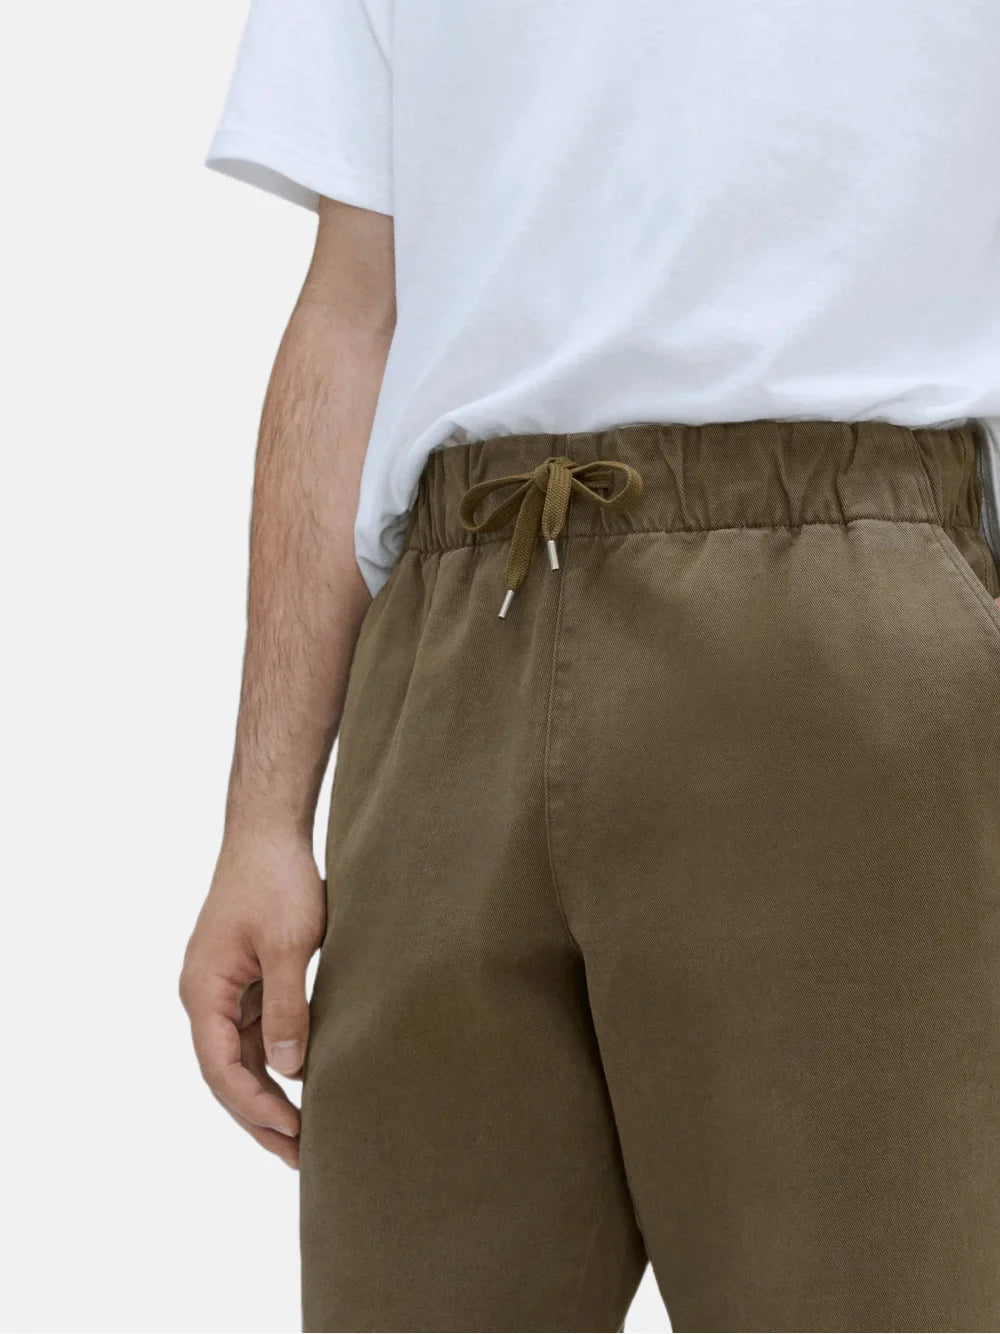 The Easy Pant